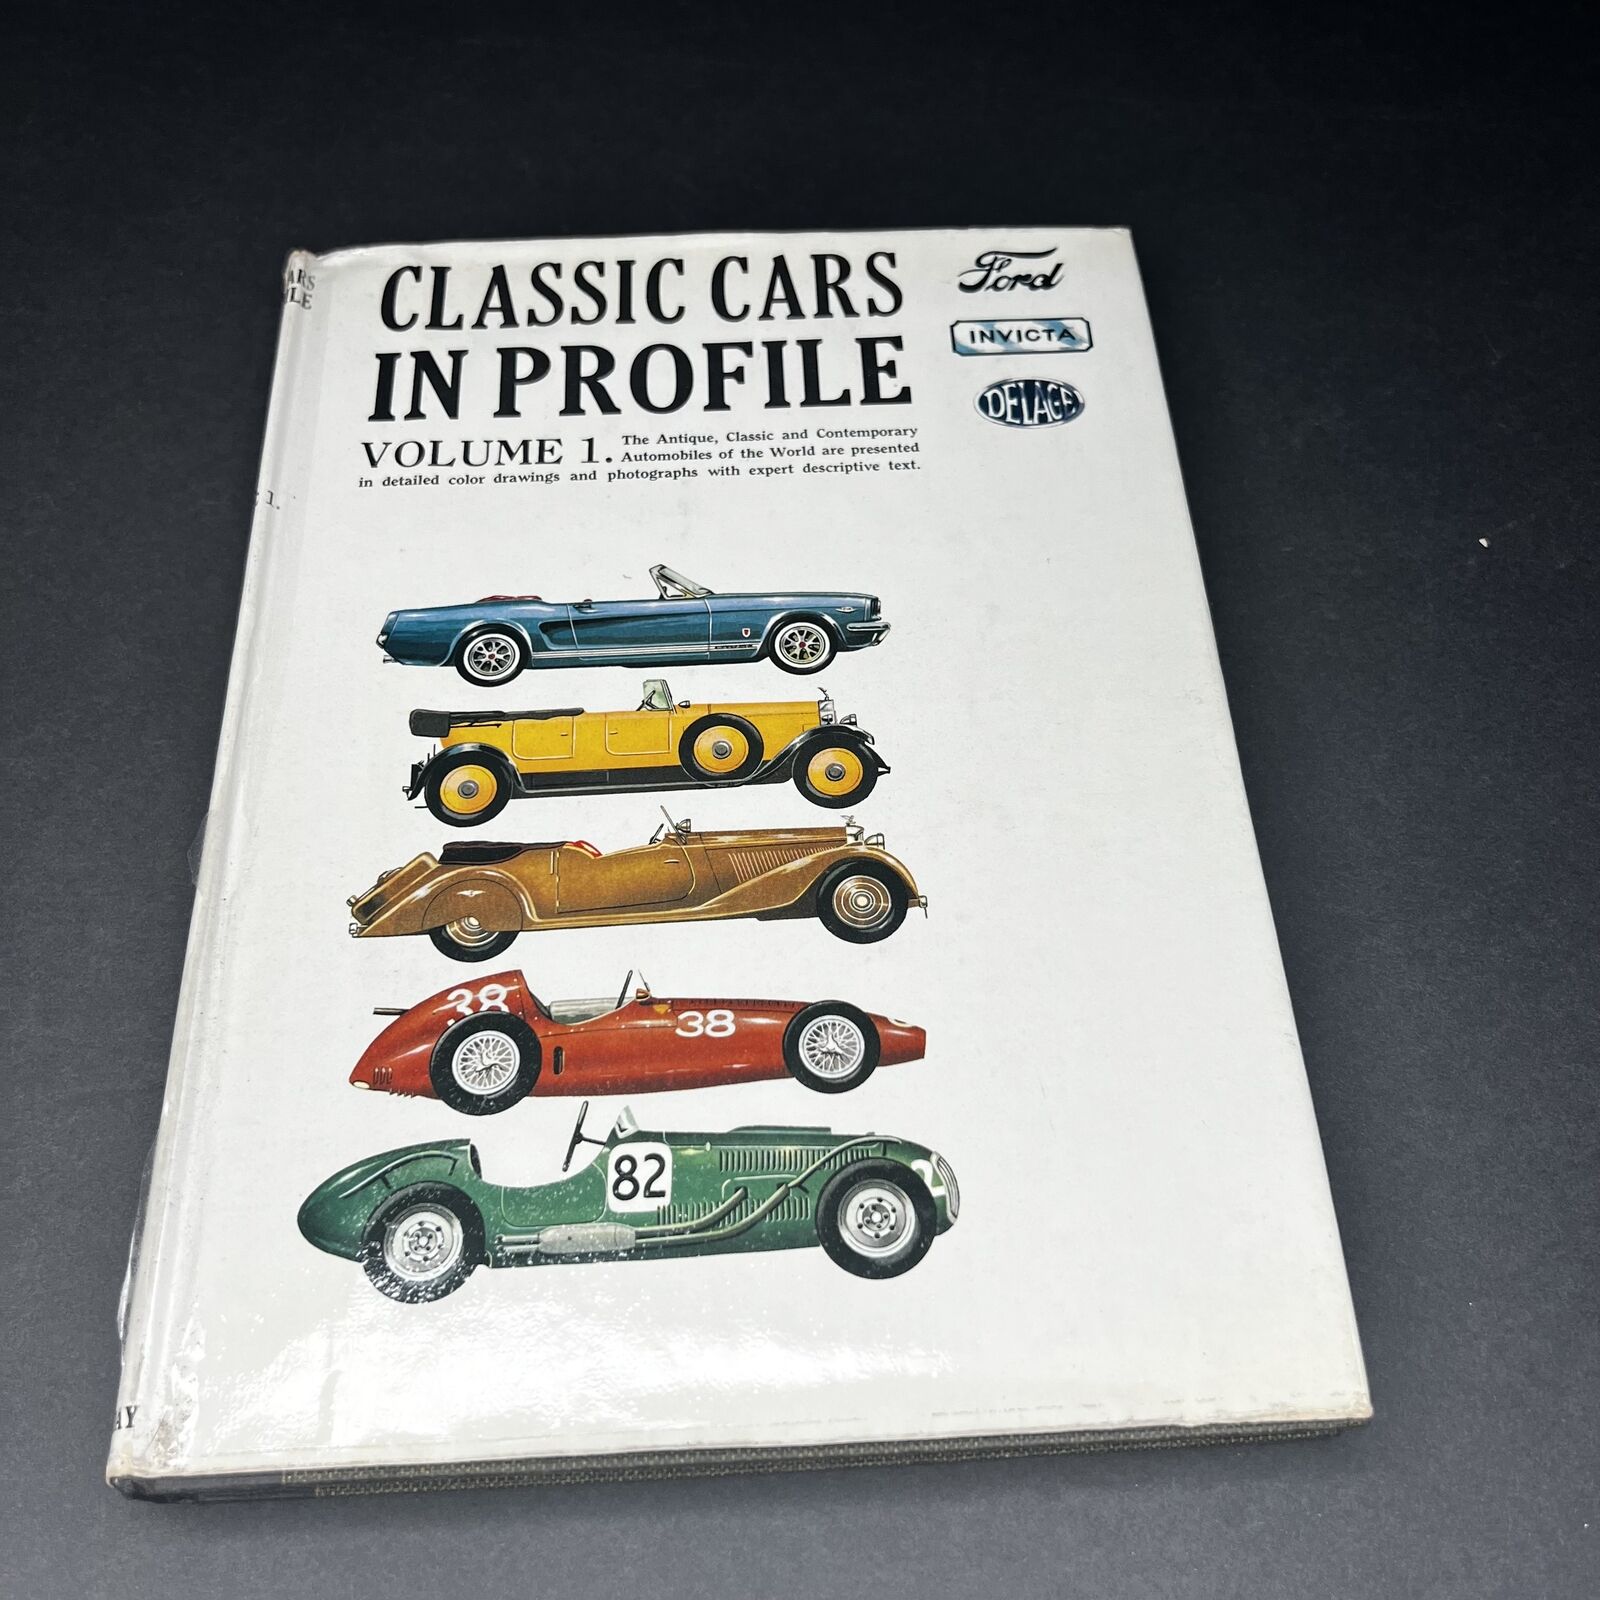 Classic Cars In Profile Volume 1 Ford Invicta Deluge Nos. 1-24 Anthony Harding